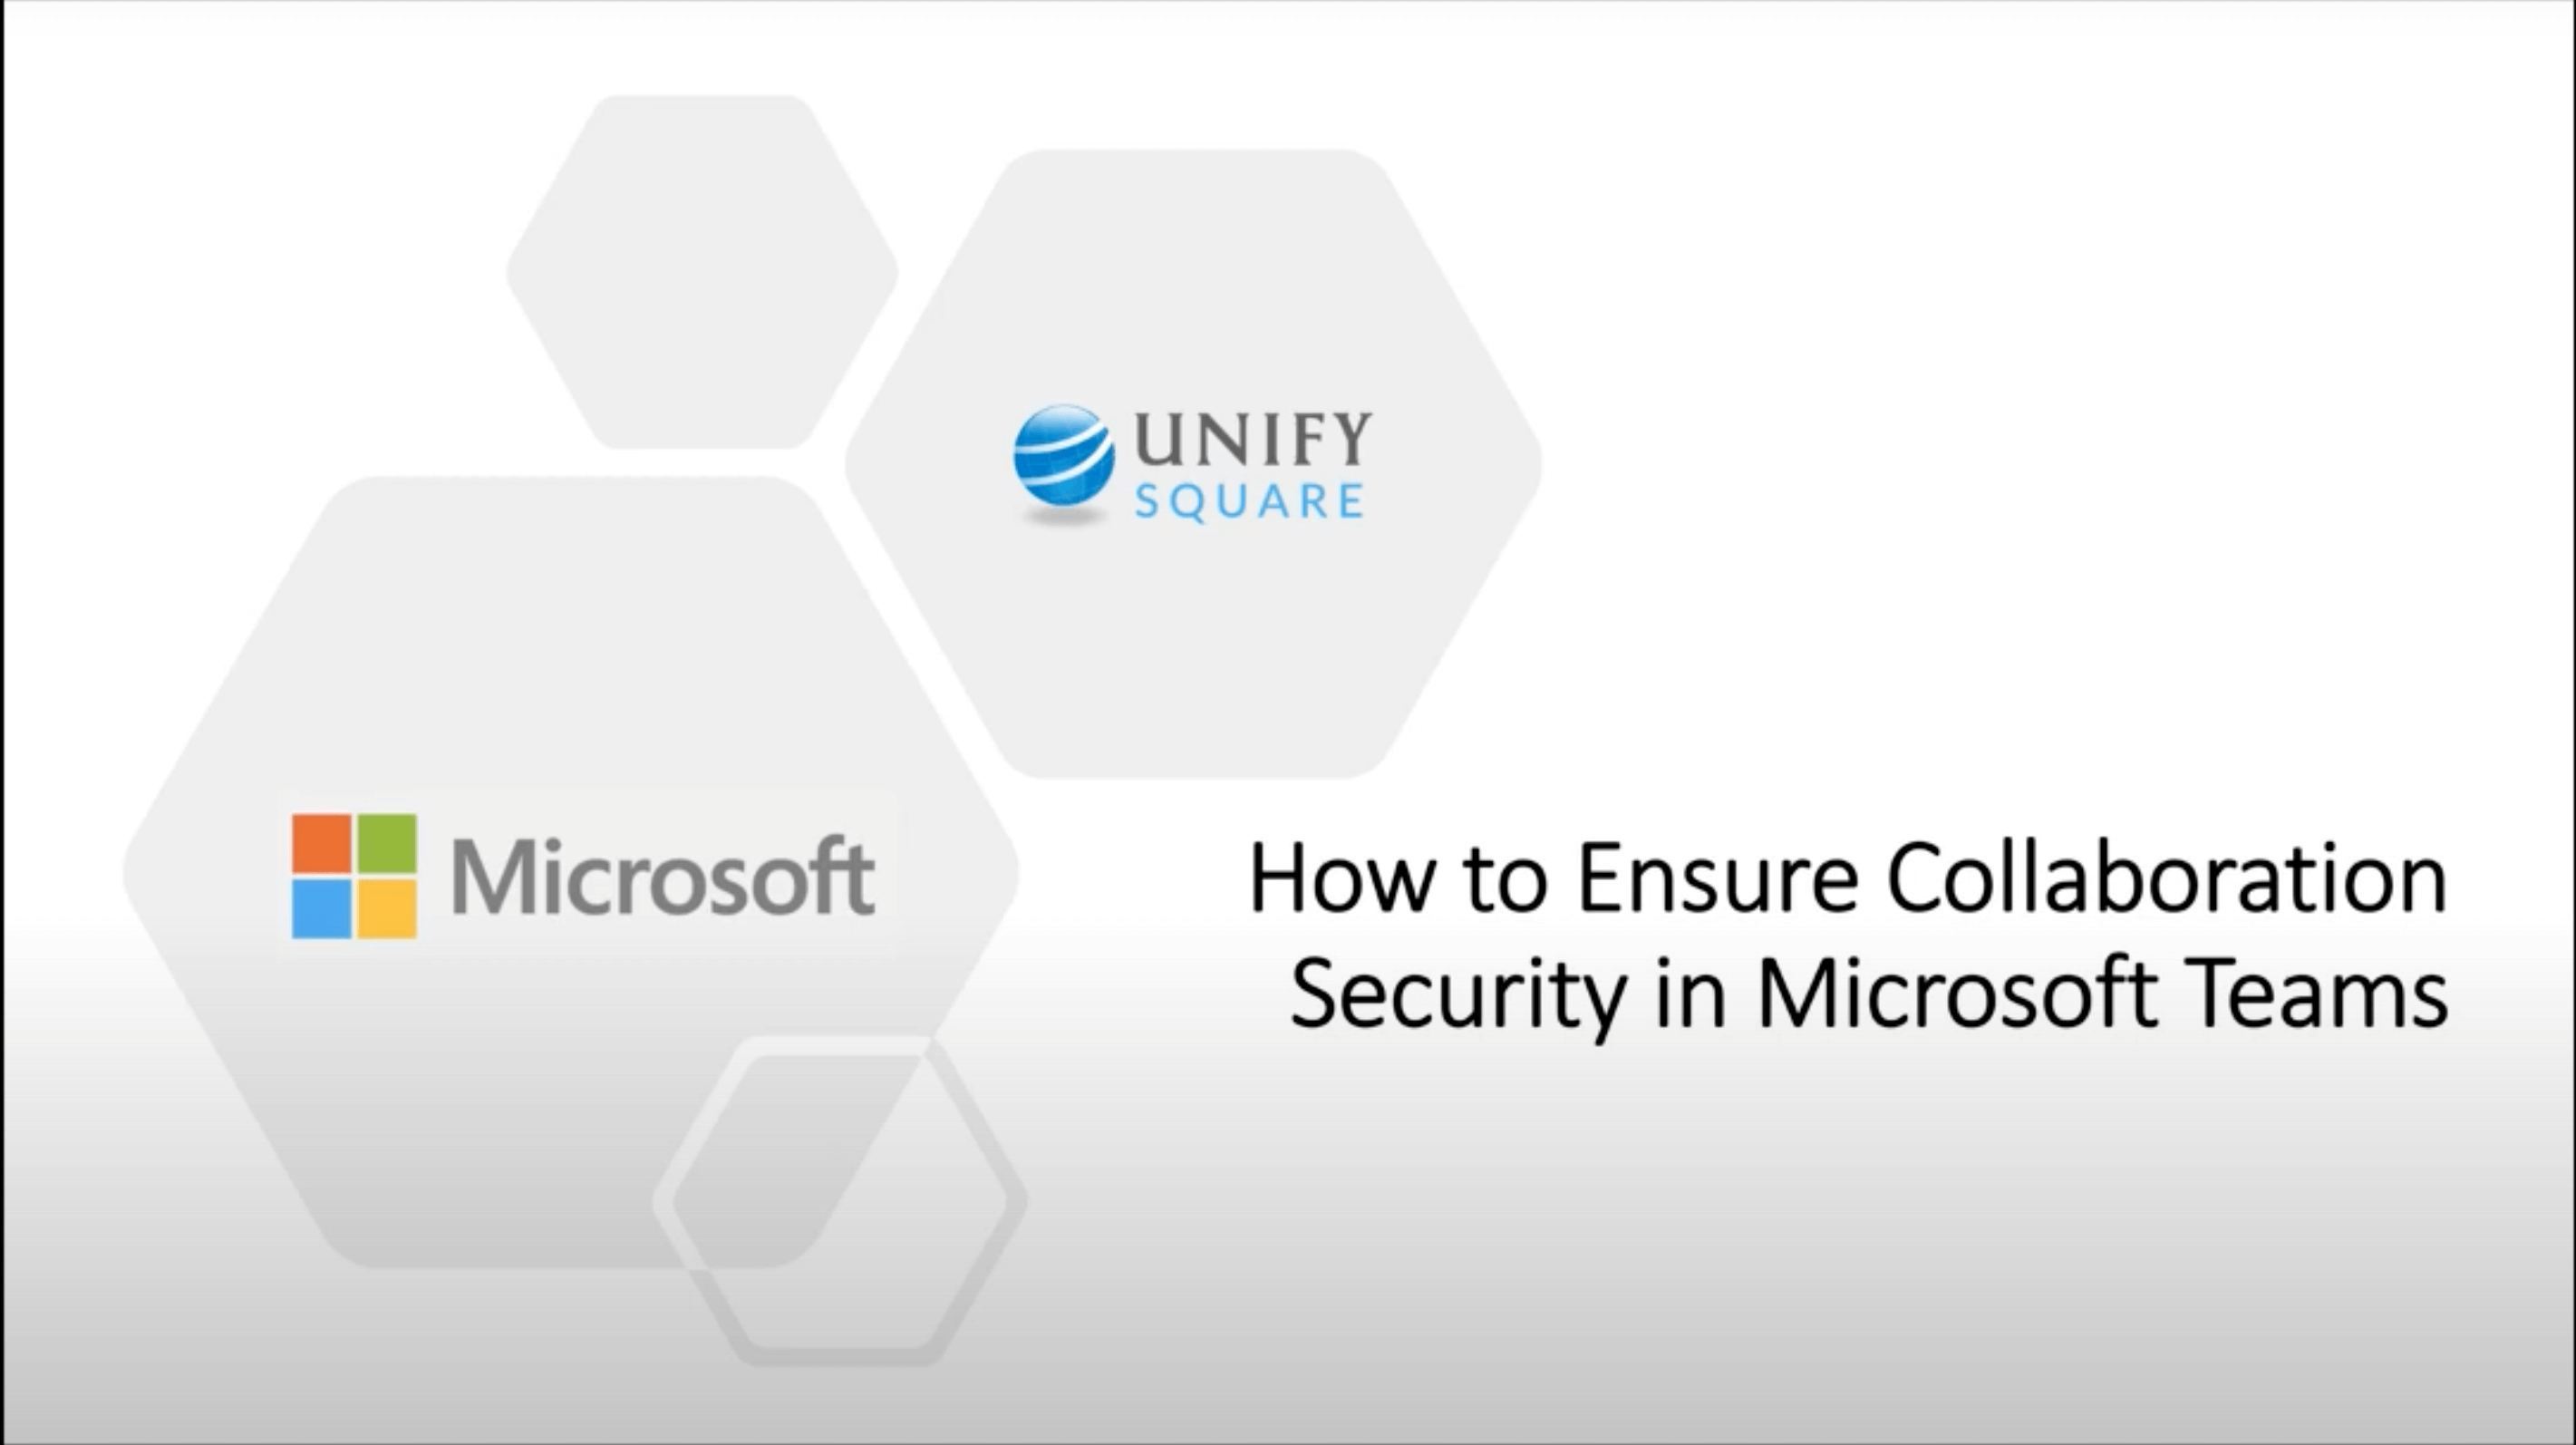 How to Ensure Collaboration Security in Microsoft Teams